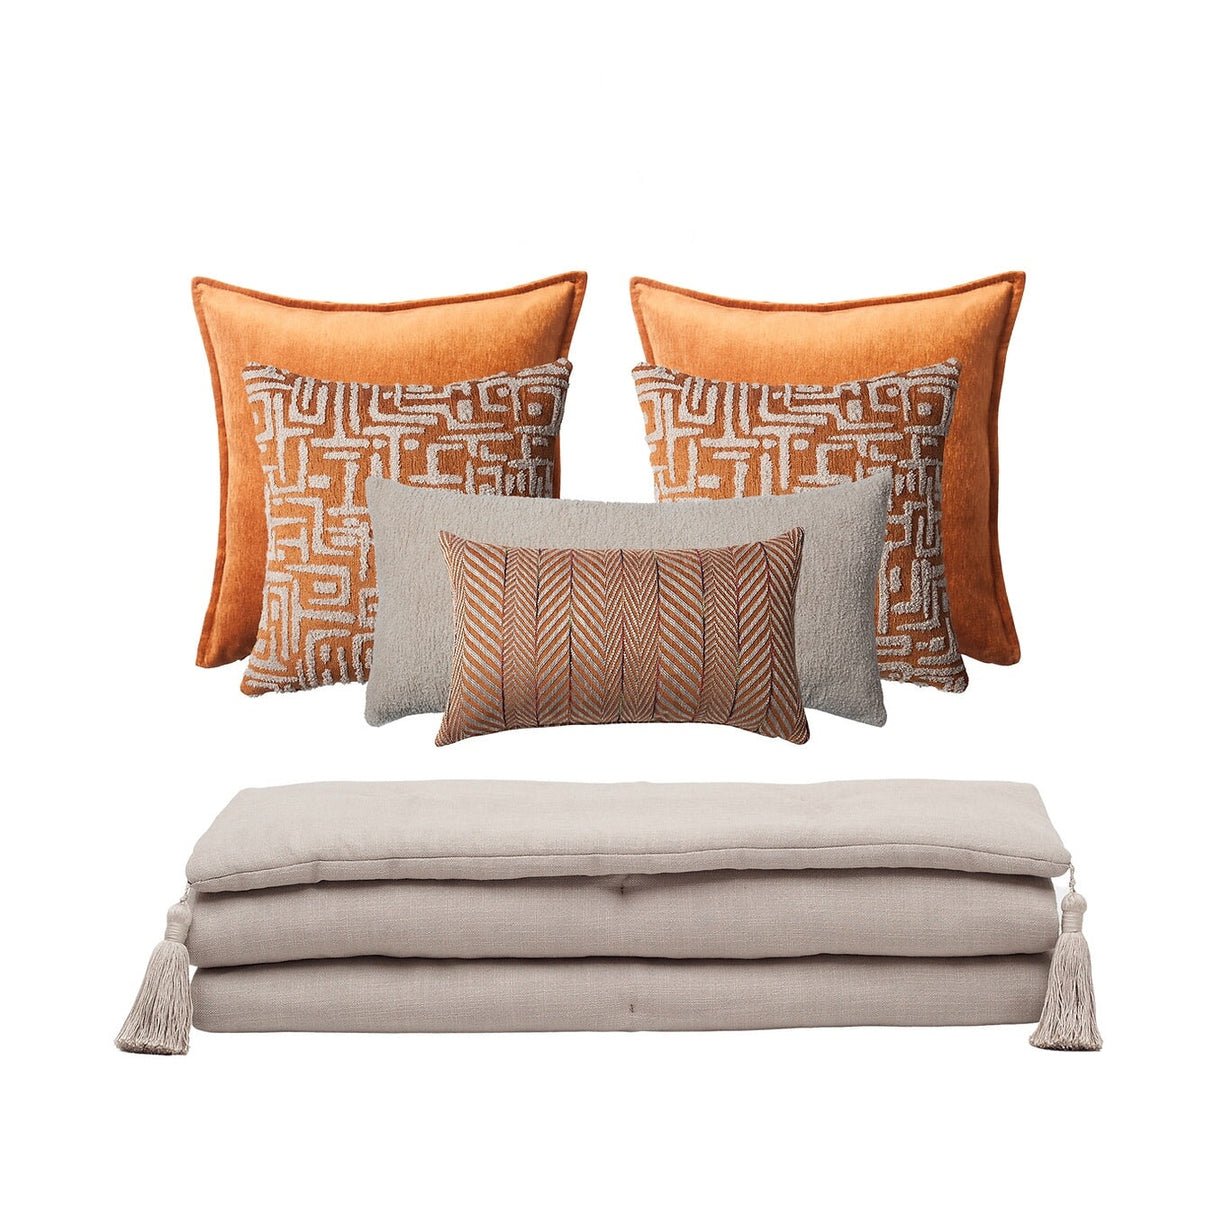 Bed Runner and 6 Pieces Orange and Beige Pillow Set